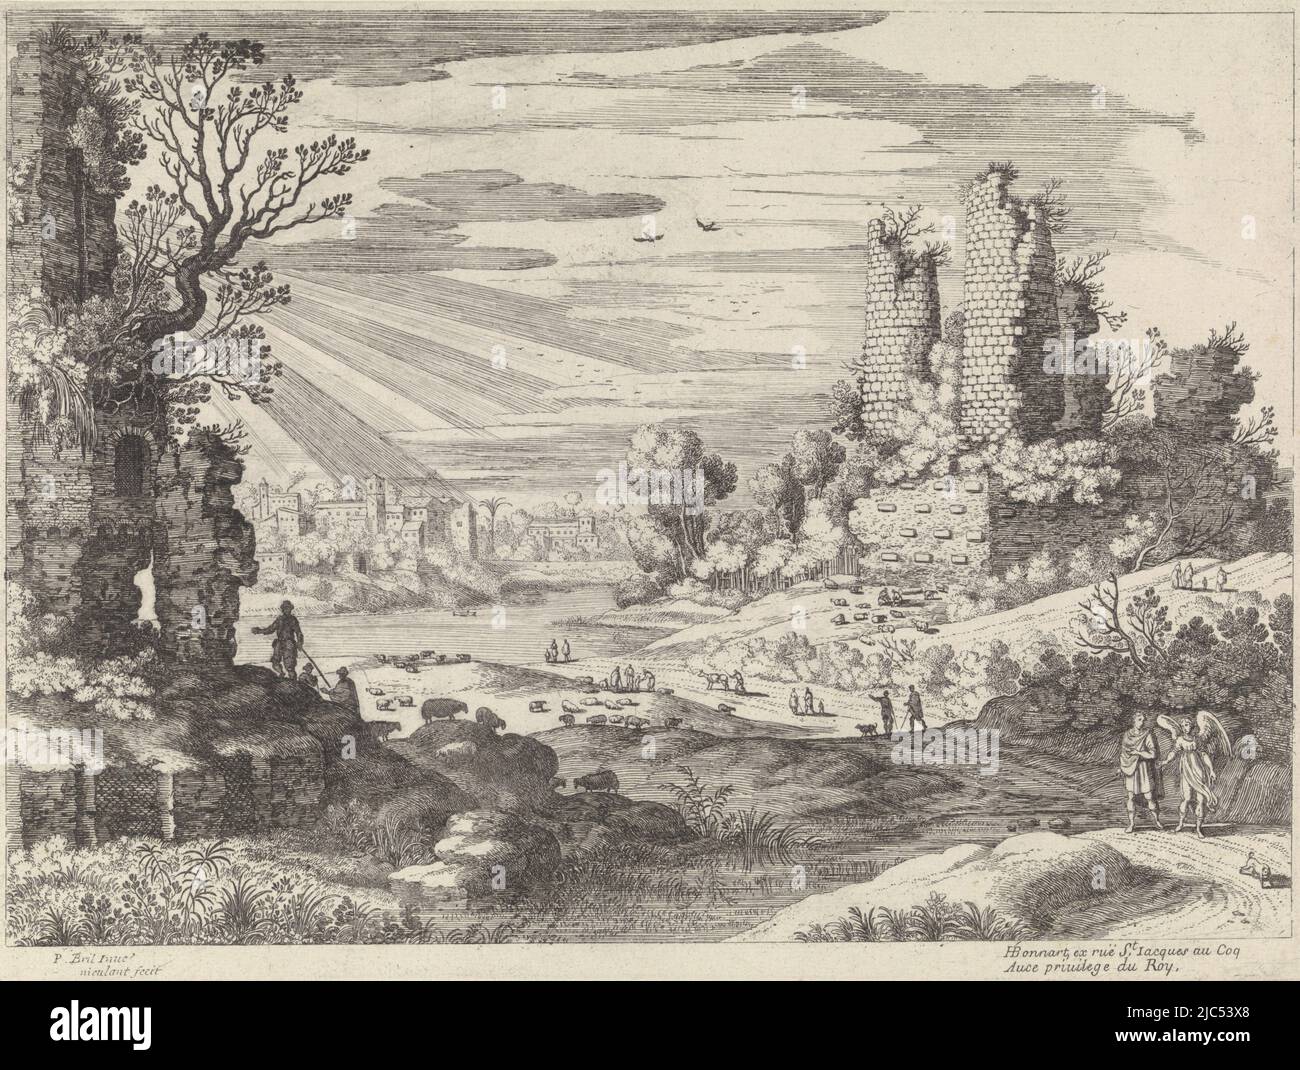 In an Italian landscape with overgrown ruins, Tobias and the angel are on their way. Walking ahead of them is Tobias' dog. Several figures and shepherds with their sheep walk in the landscape. Across a river lies a town, Italian landscape with Tobias and the angel, print maker: Willem van Nieulandt (II), (mentioned on object), Paul Bril, (mentioned on object), publisher: H. Bonnart, (mentioned on object), Paris, 1594 - 1635, paper, etching, engraving, h 238 mm × w 315 mm Stock Photo